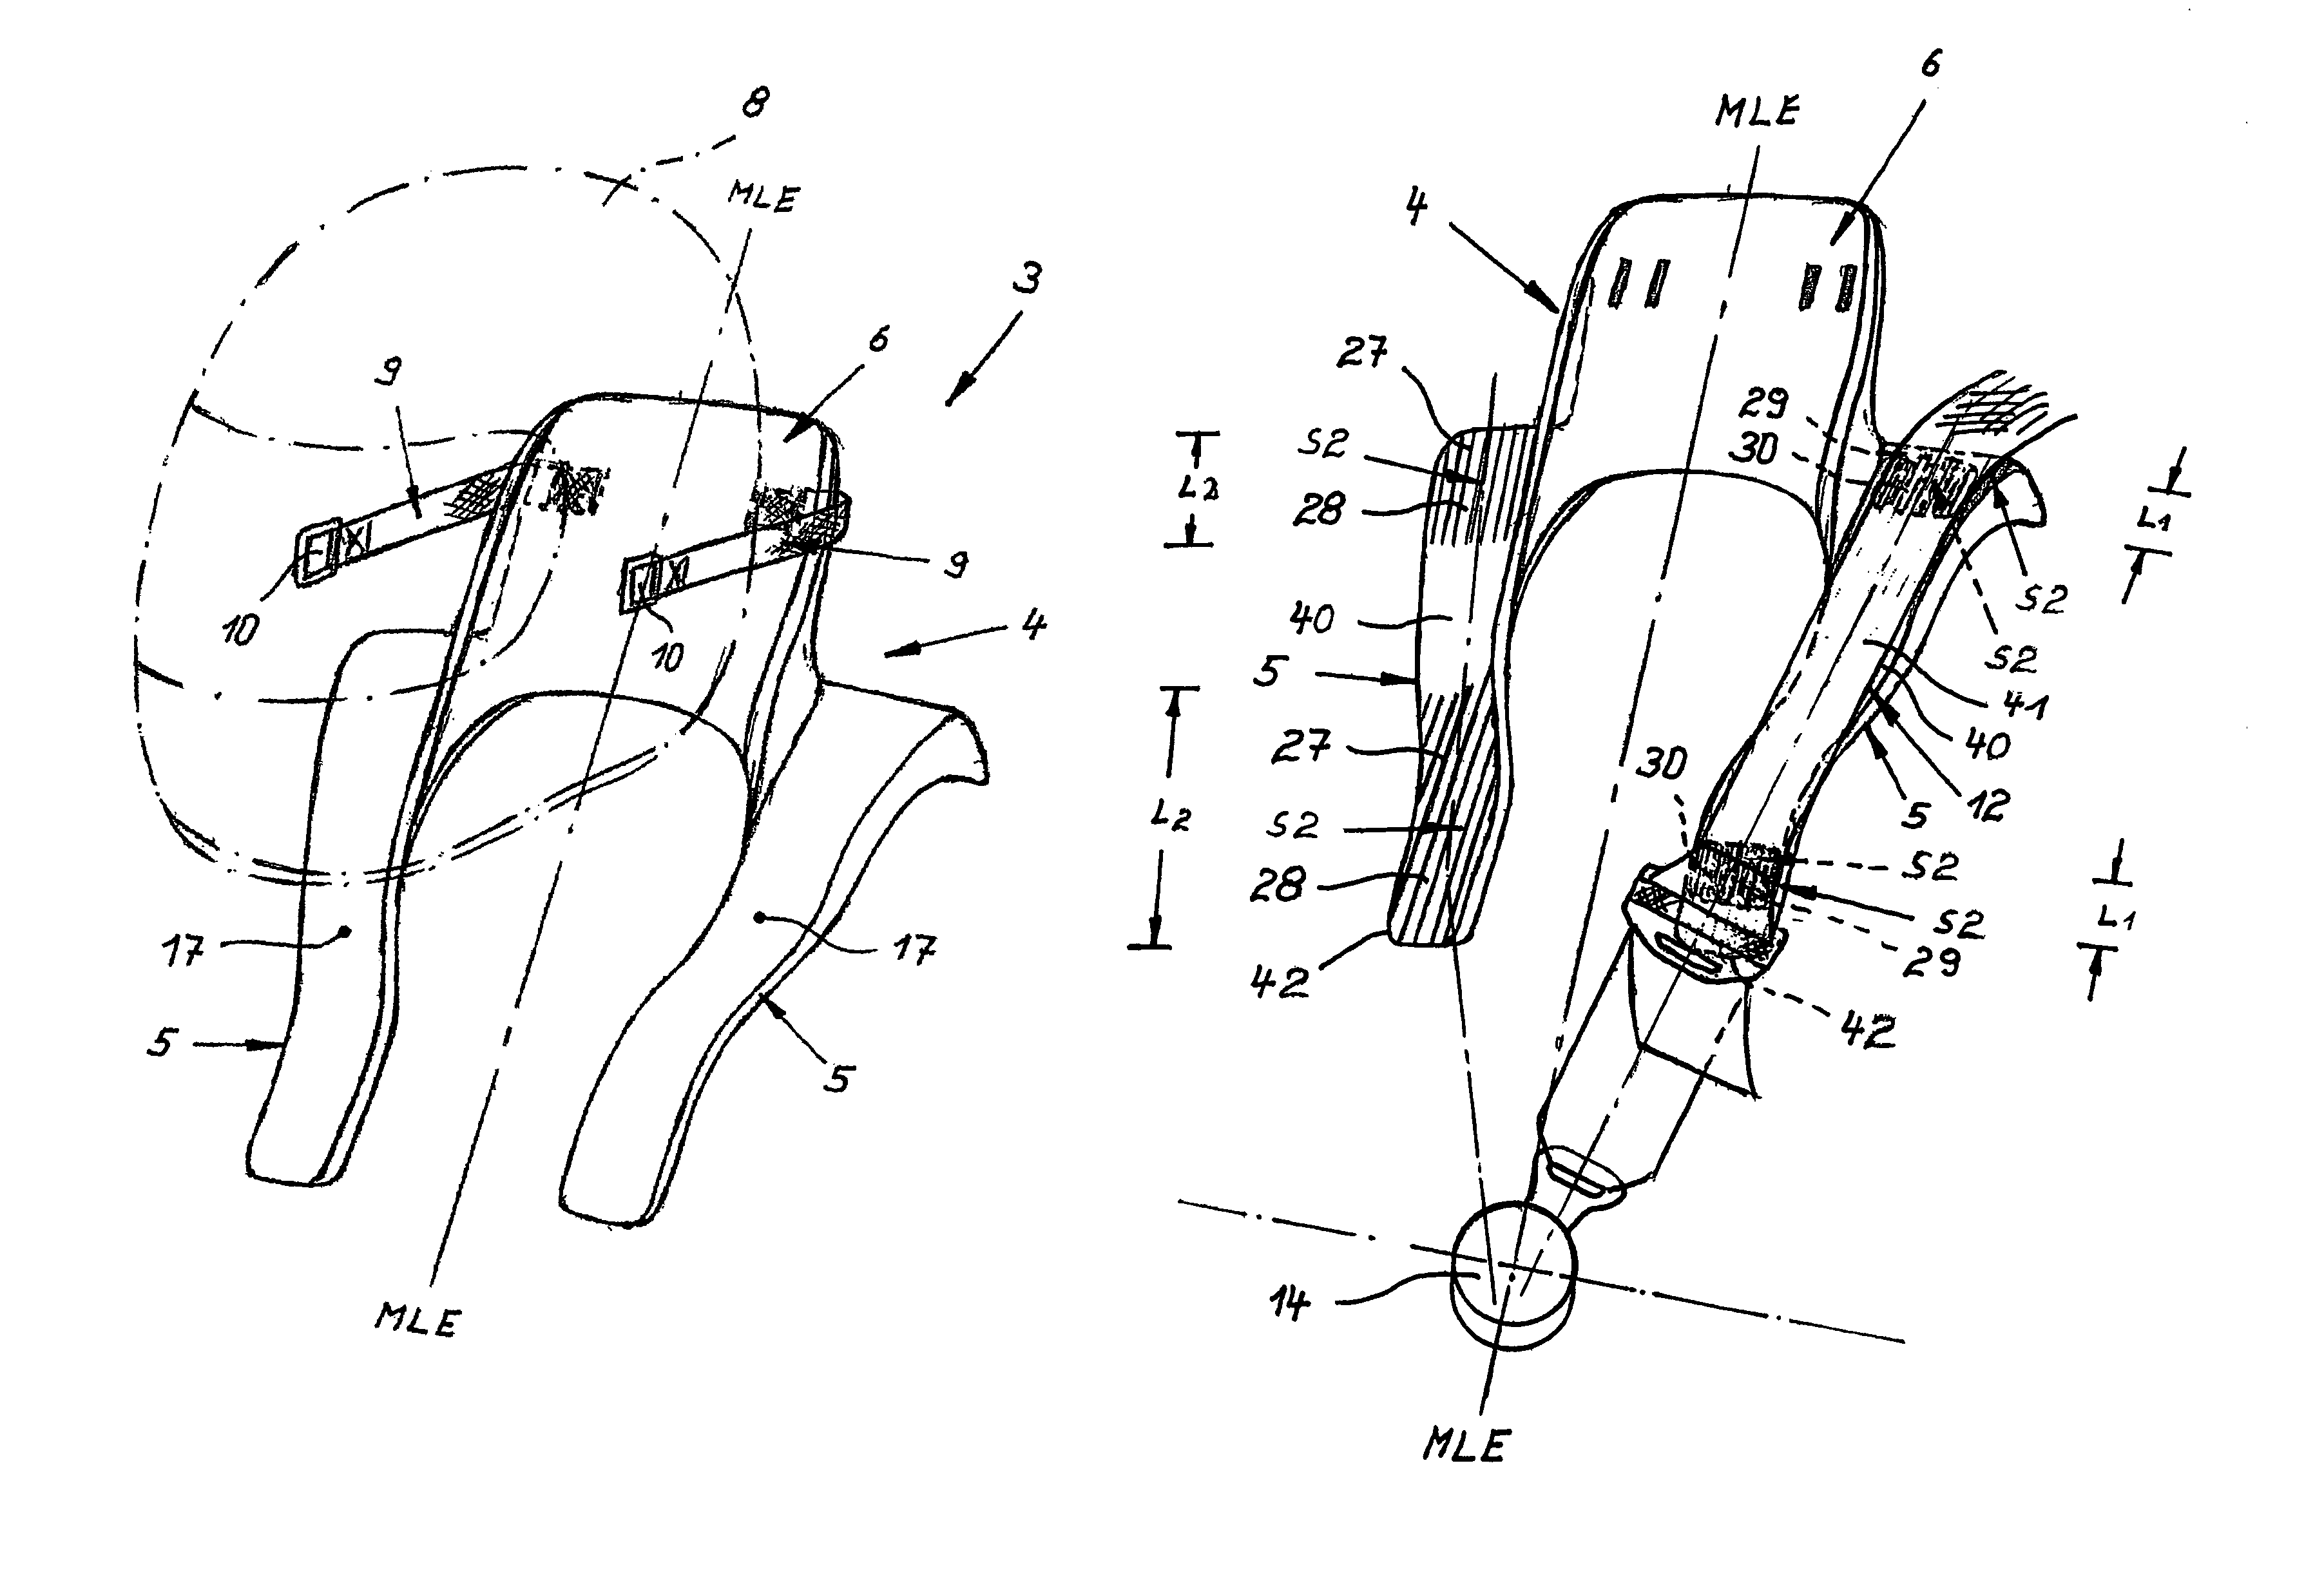 Restraint system for restraining a person in a vehicle of transportation